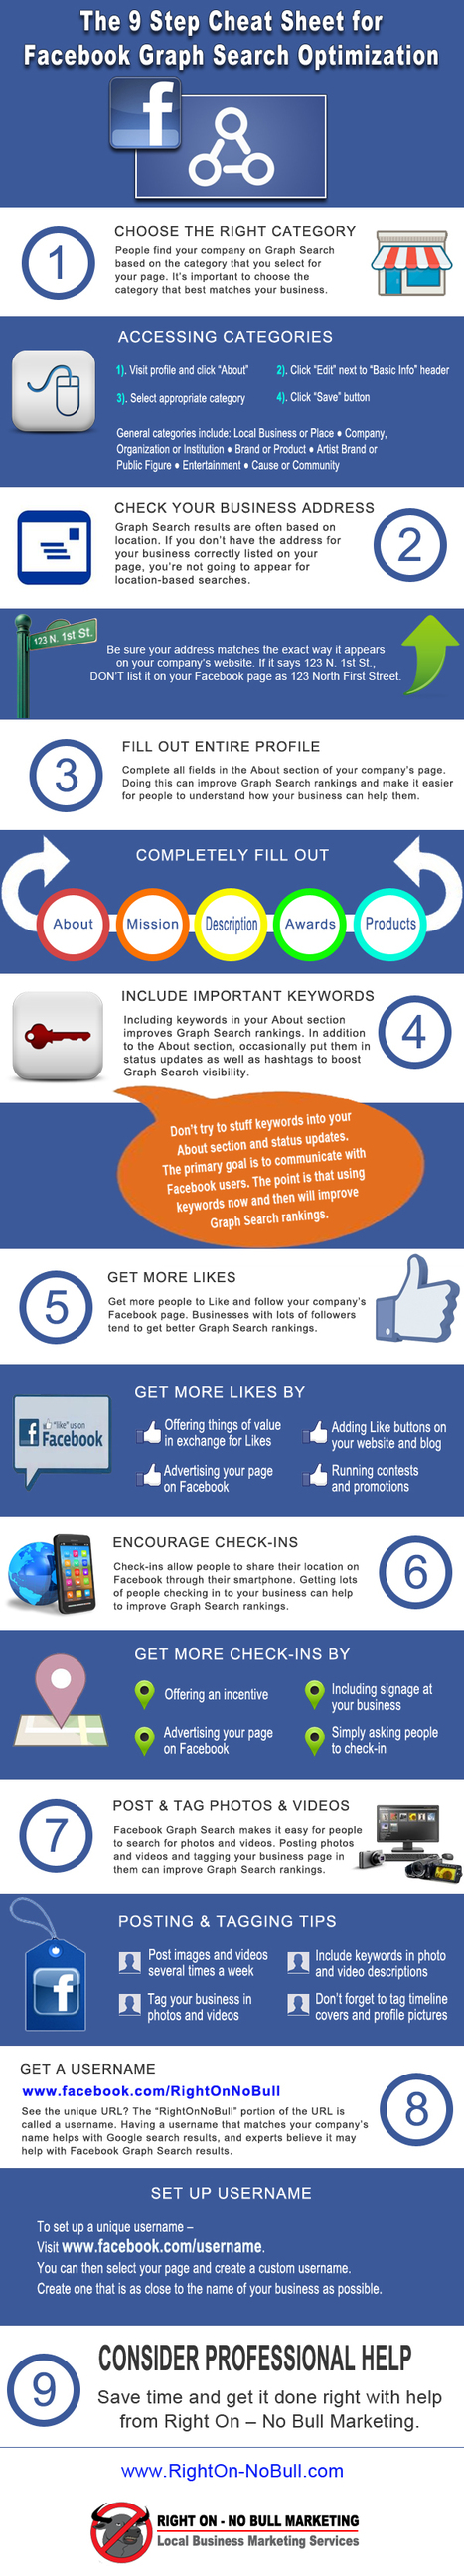 9 Steps for Facebook Graph Search Optimization [INFOGRAPHIC] | SocialMedia_me | Scoop.it